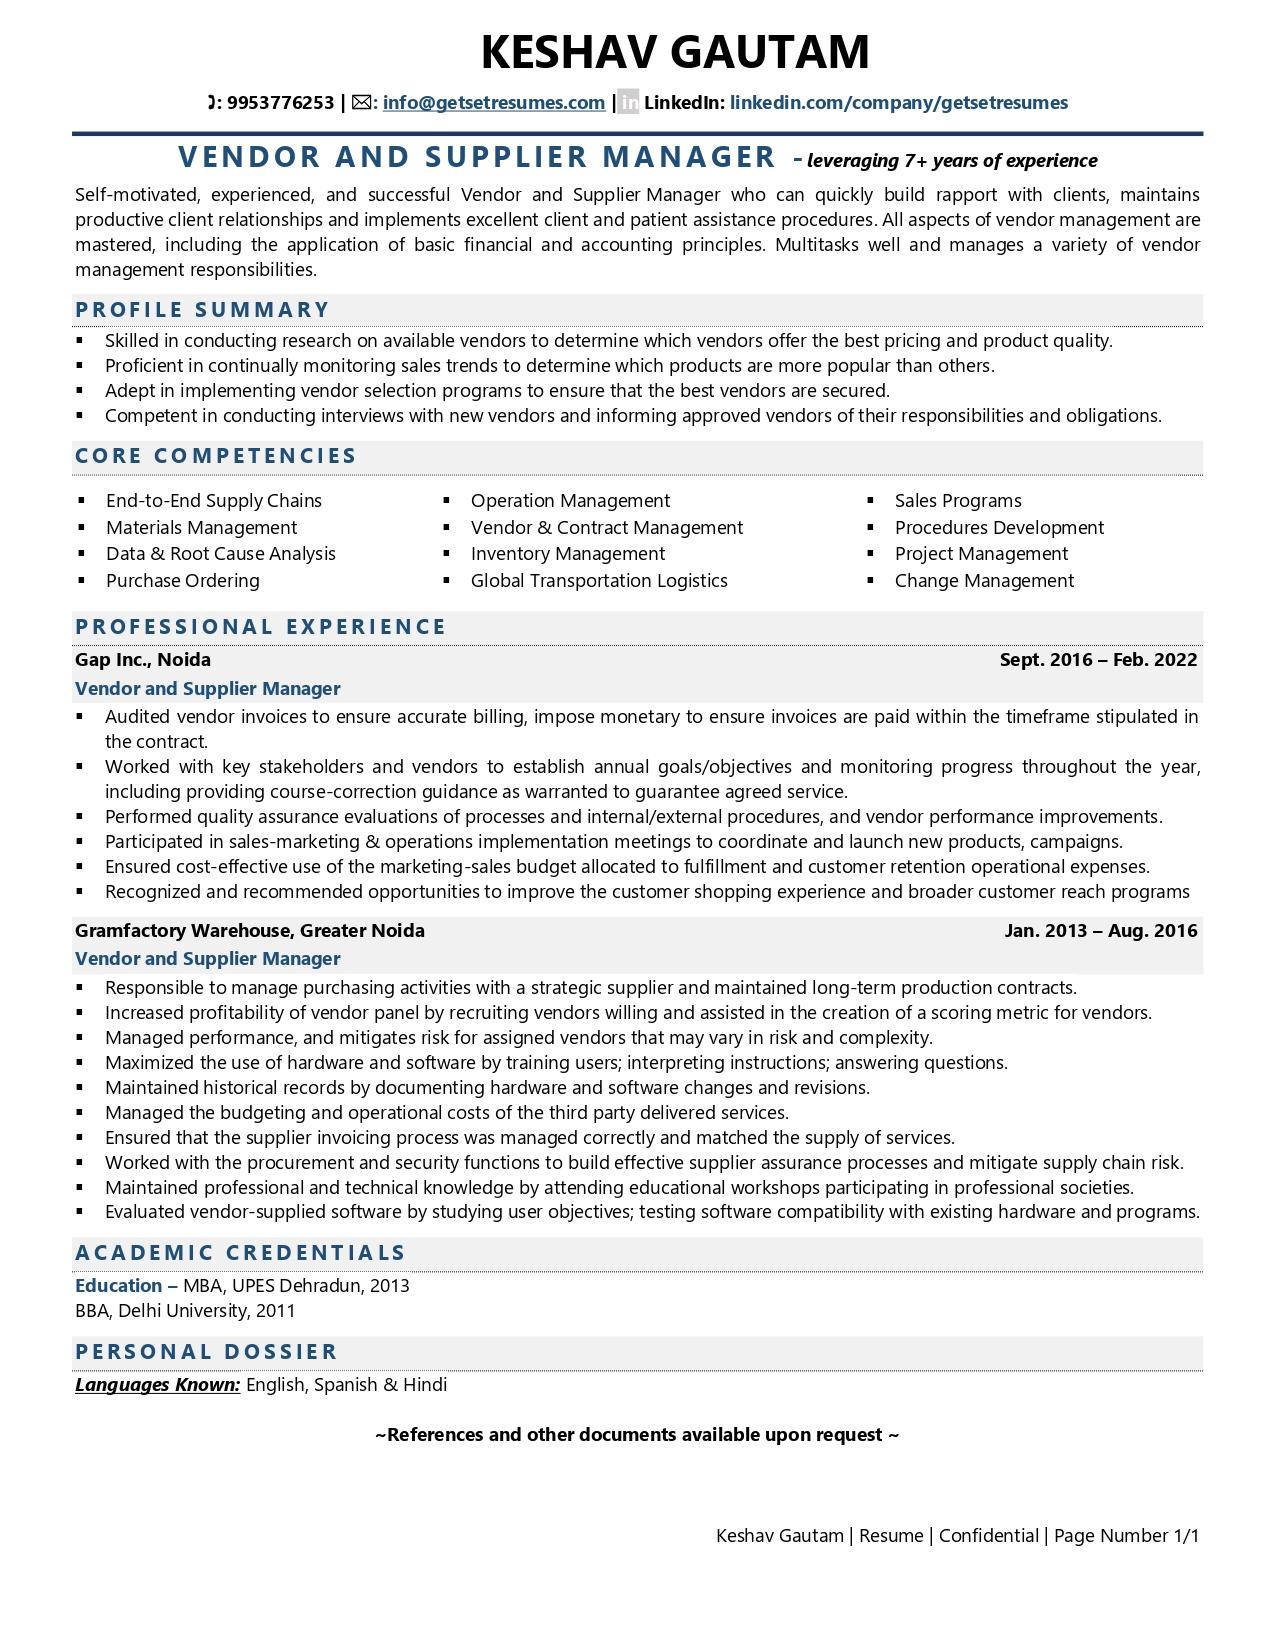 Vendor & Supplier Manager - Resume Example & Template